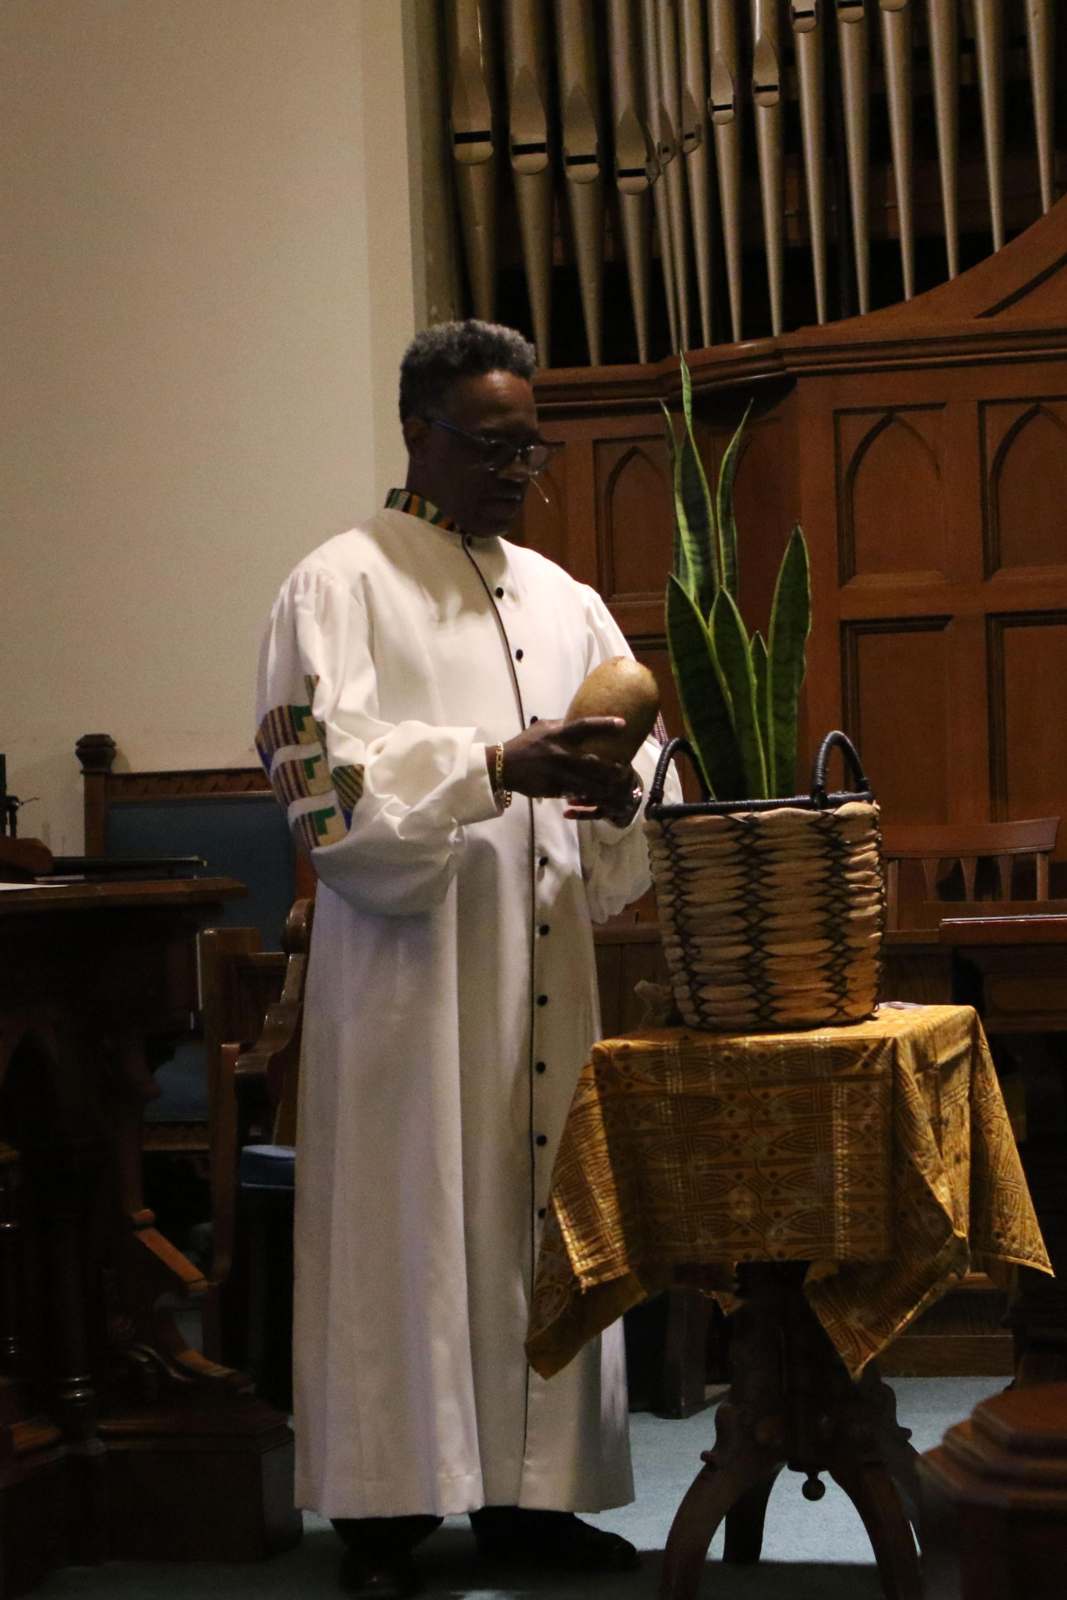 a man in a white robe standing next to a basket with a plant